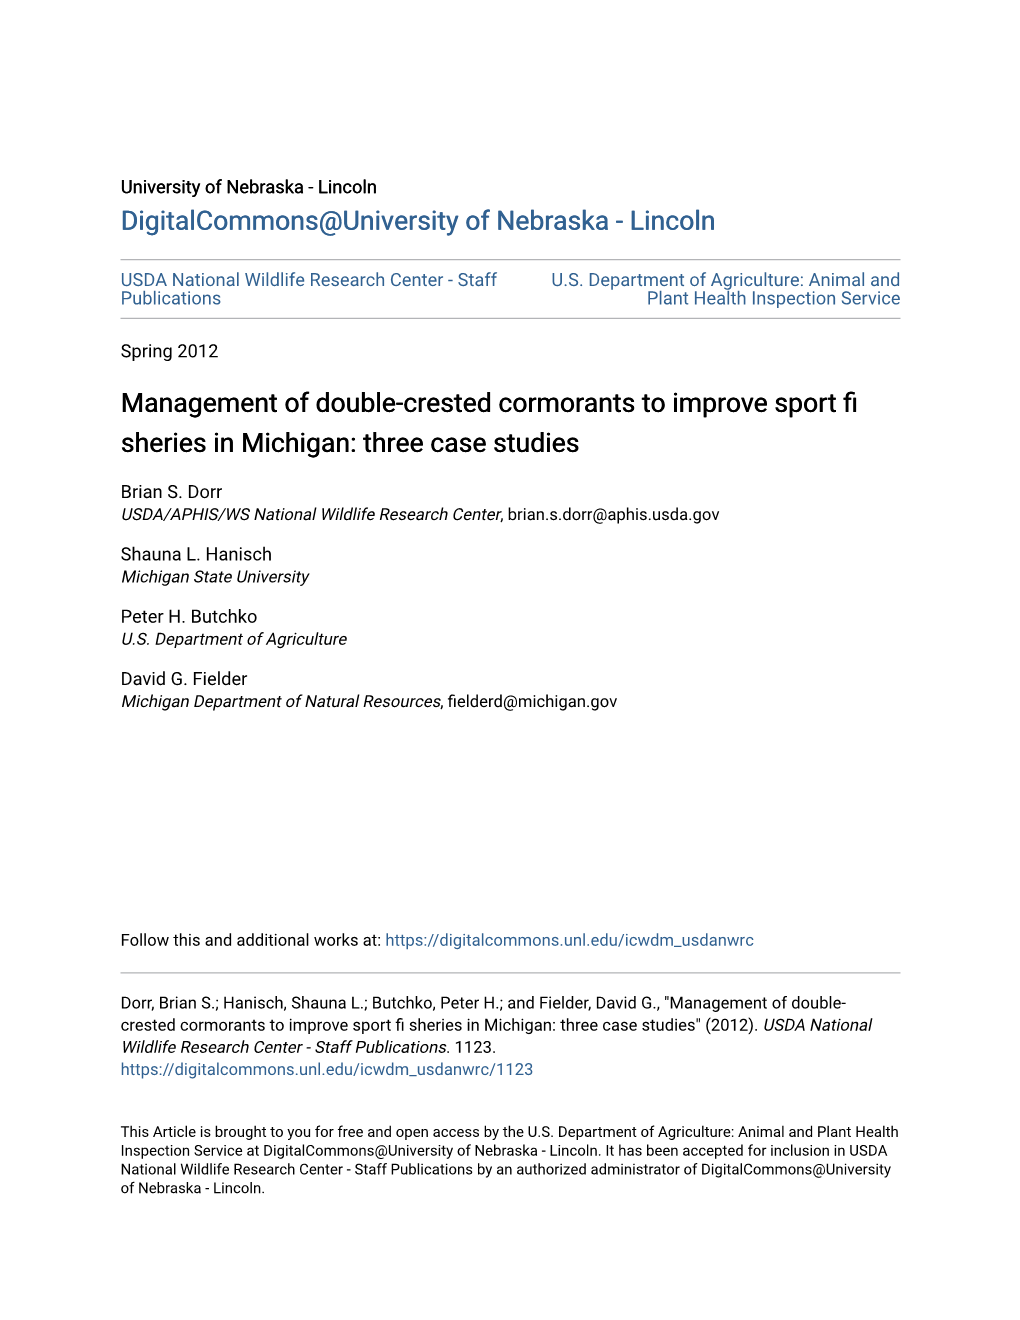 Management of Double-Crested Cormorants to Improve Sport Fi Sheries in Michigan: Three Case Studies